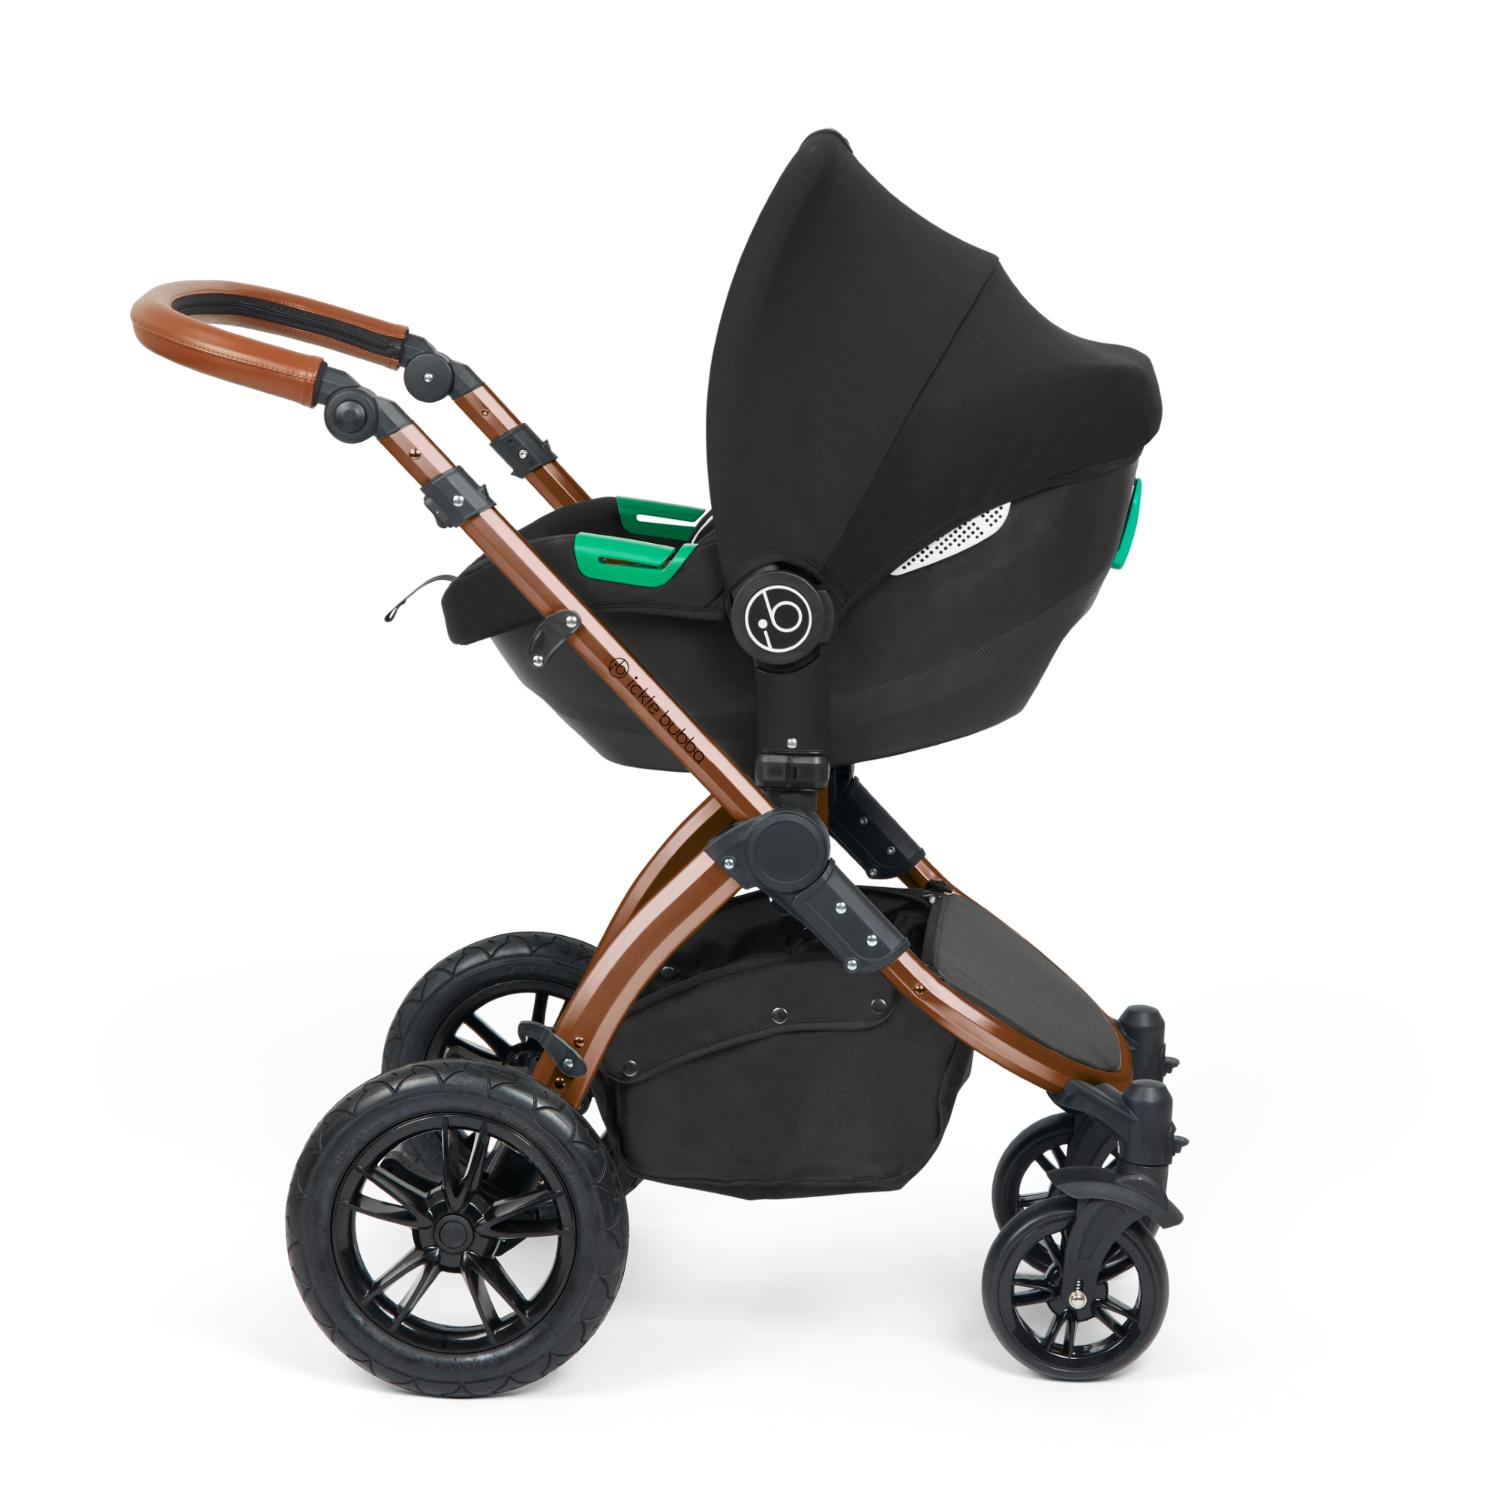 Ickle Bubba Stomp Luxe Pushchair with Cirrus i-Size car seat attached in Midnight black colour with bronze chassis and tan handle